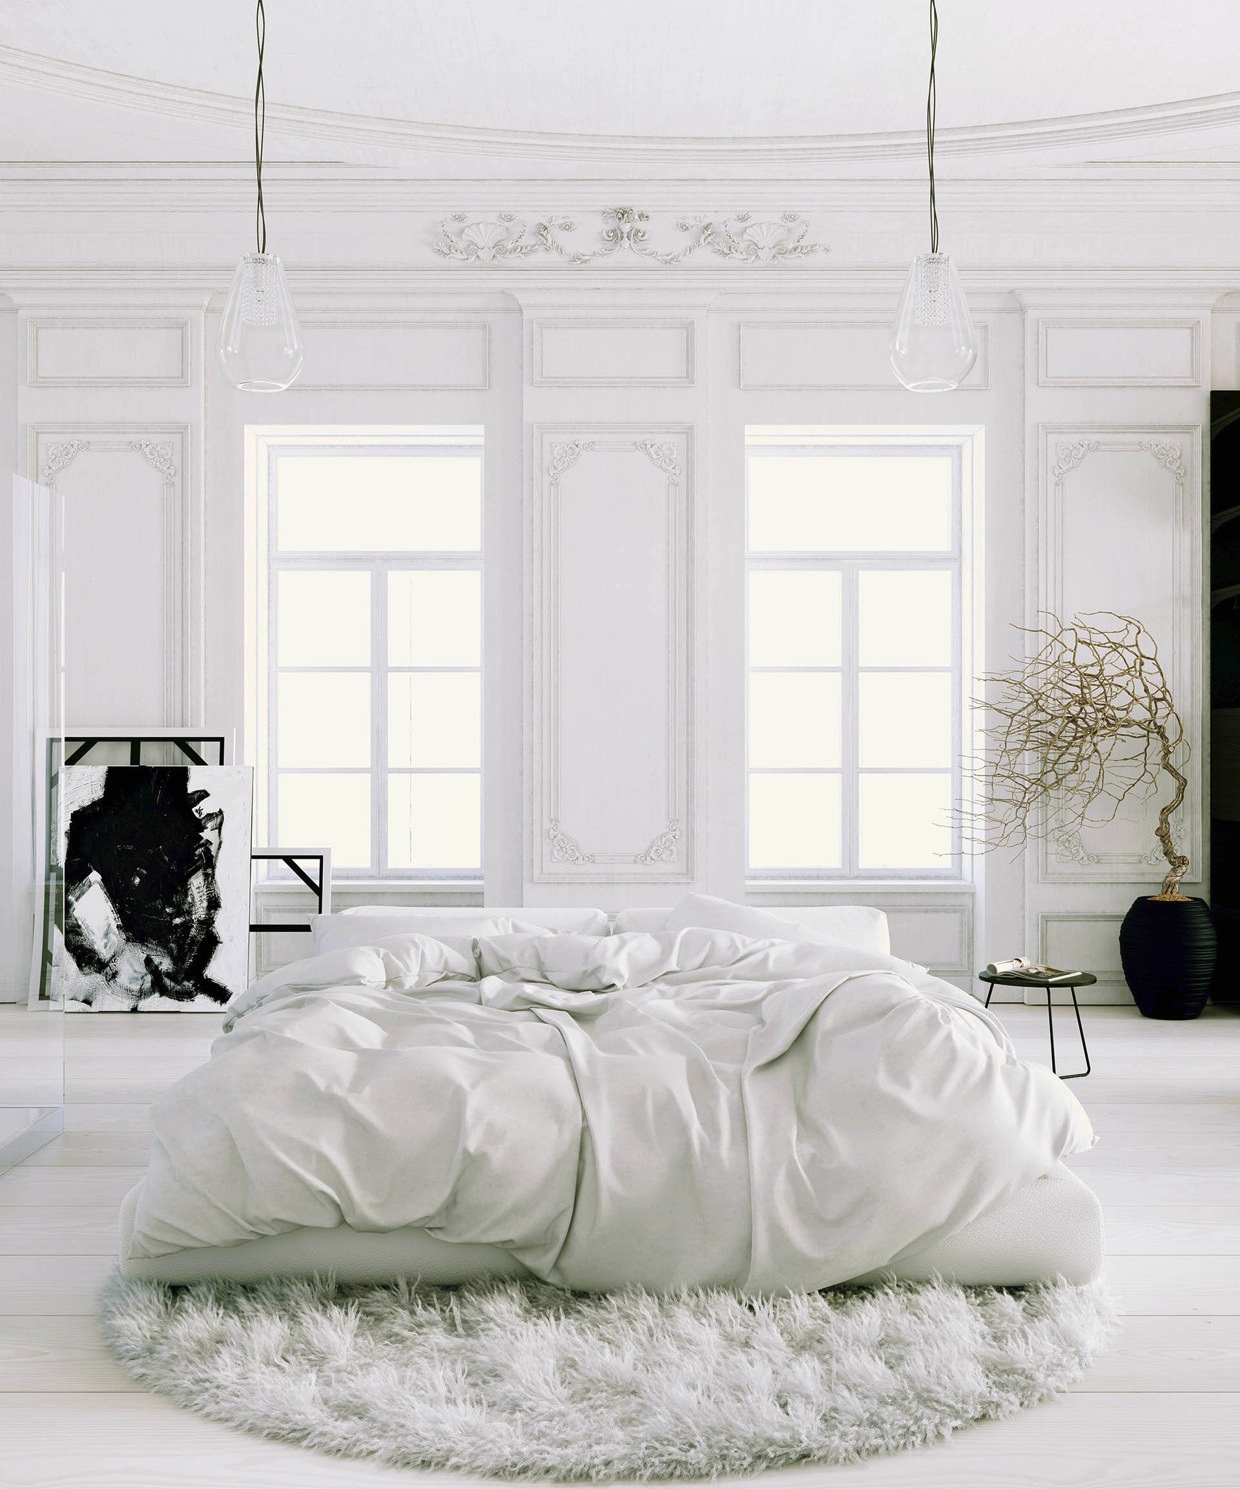 Parisian Apartment soft white bedroom with black accents and potted tree rug